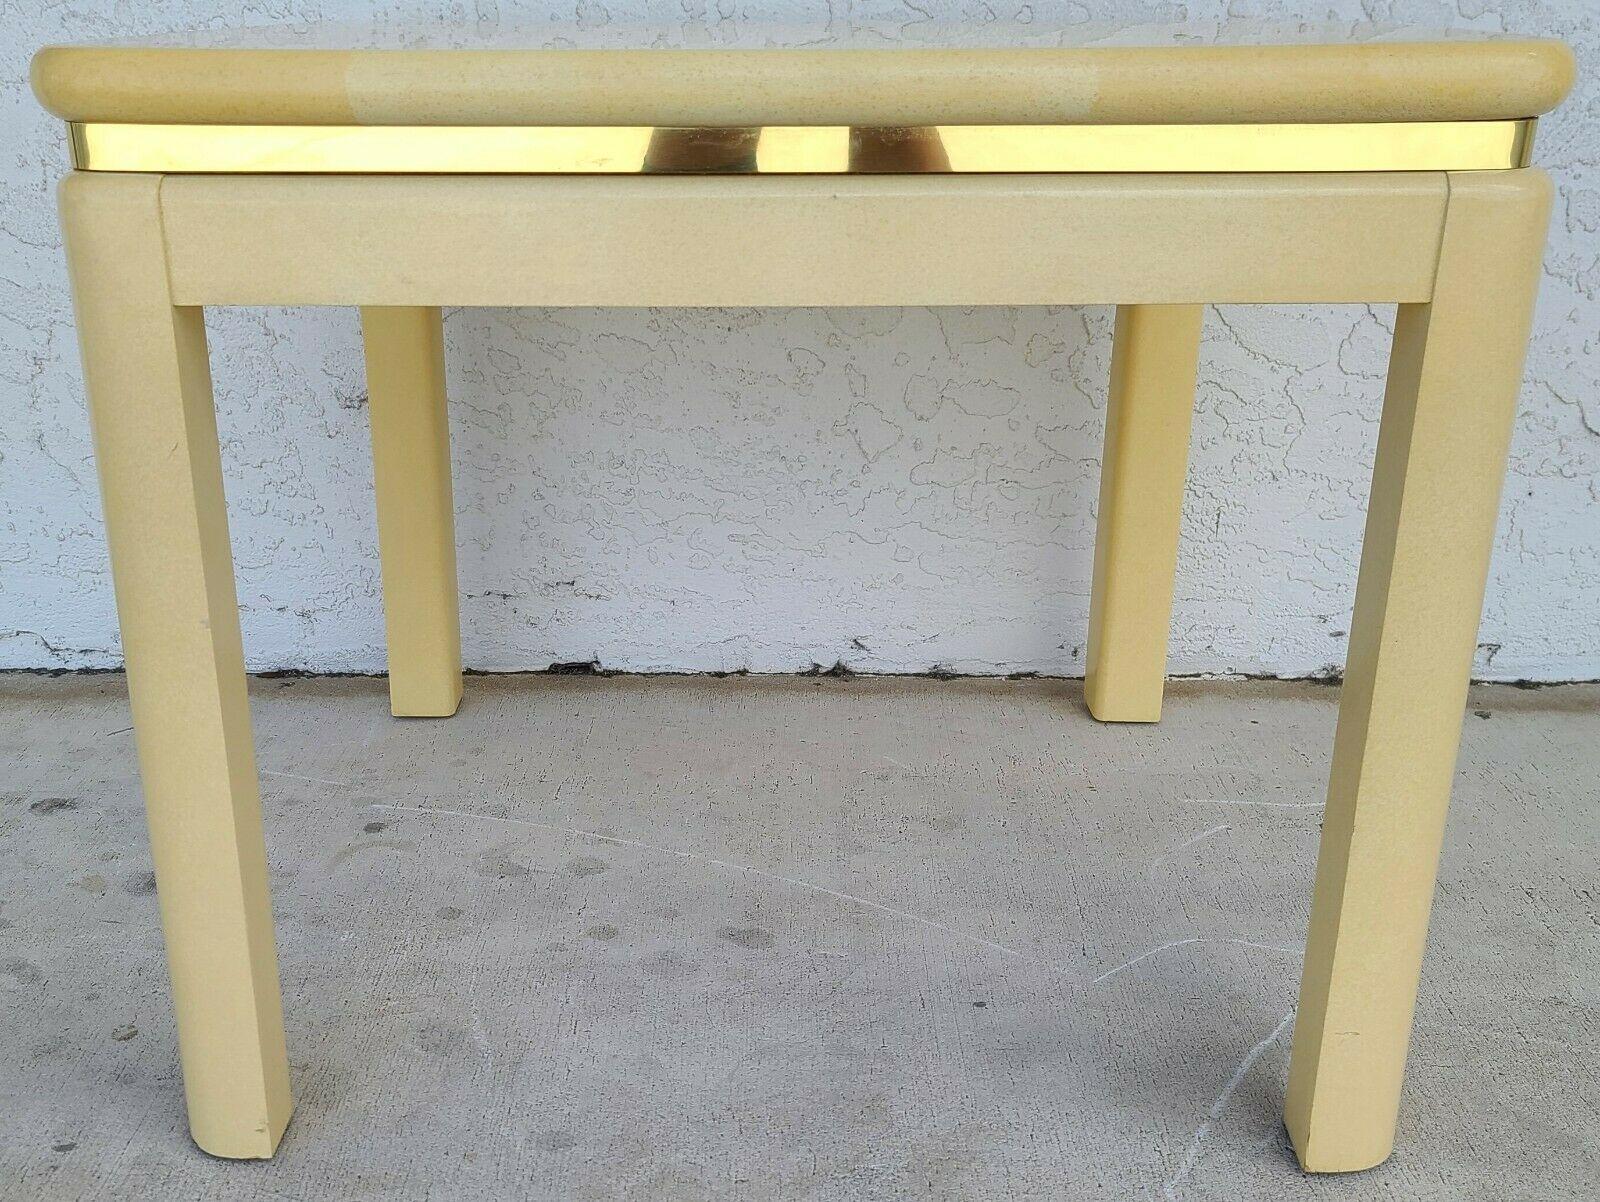 Offering one of our recent palm beach estate fine furniture acquisitions of a 1980's Karl Springer style faux lacquered goatskin side table

This listing and price are for the side table shown.


Approximate measurements in inches
22